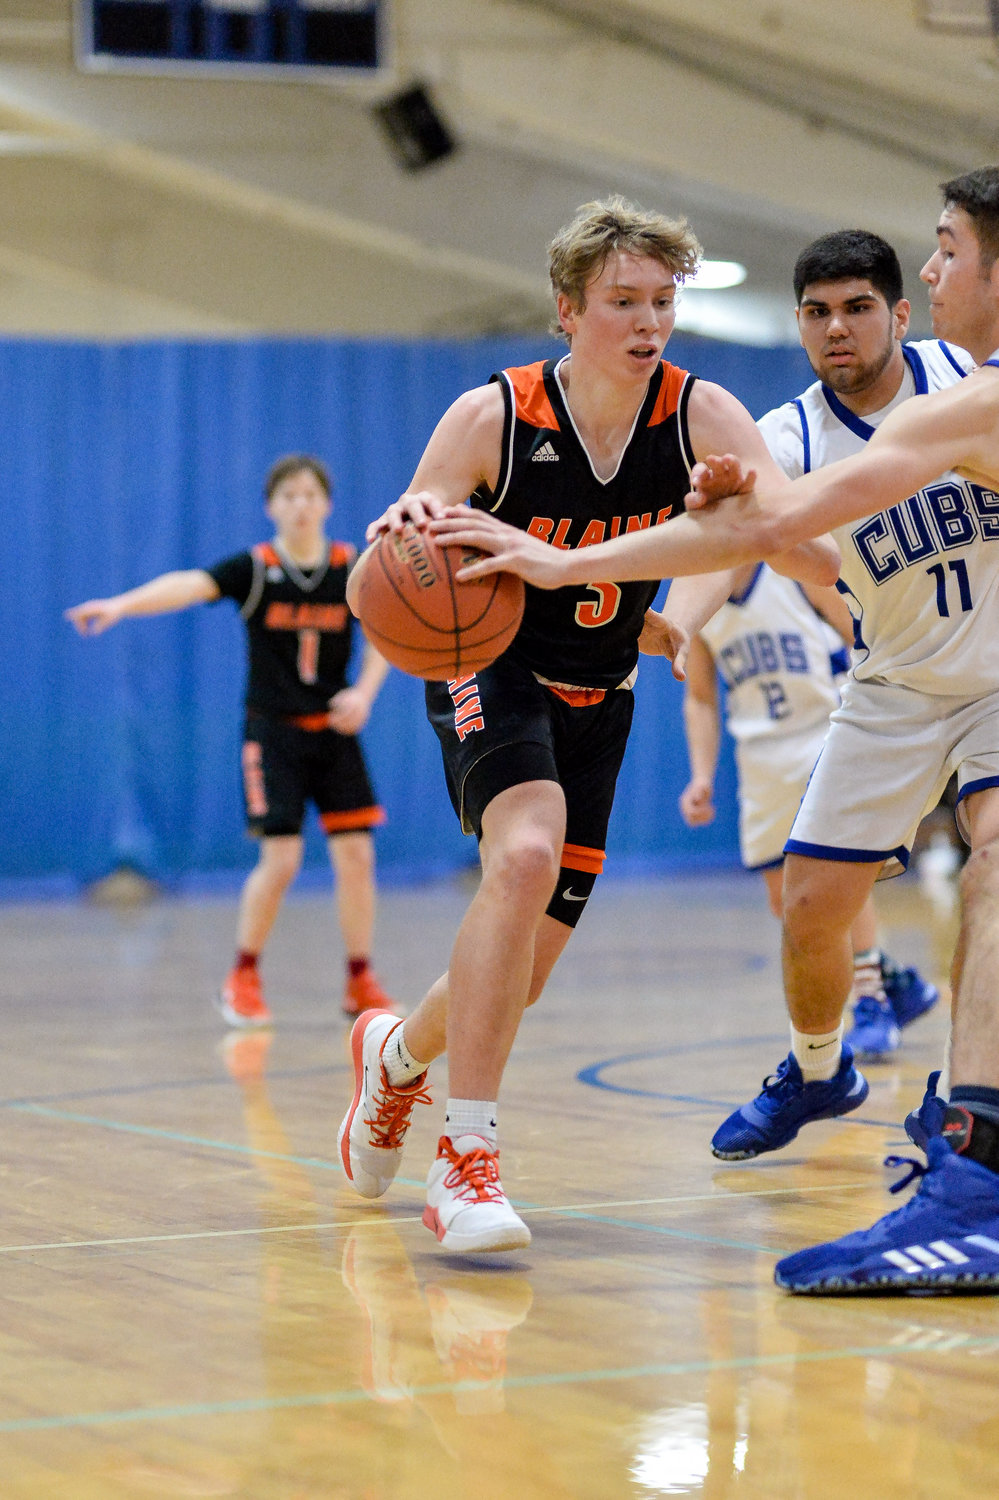 Zane Rector led Blaine’s offense with 25 points against Sedro-Woolley on January 21.